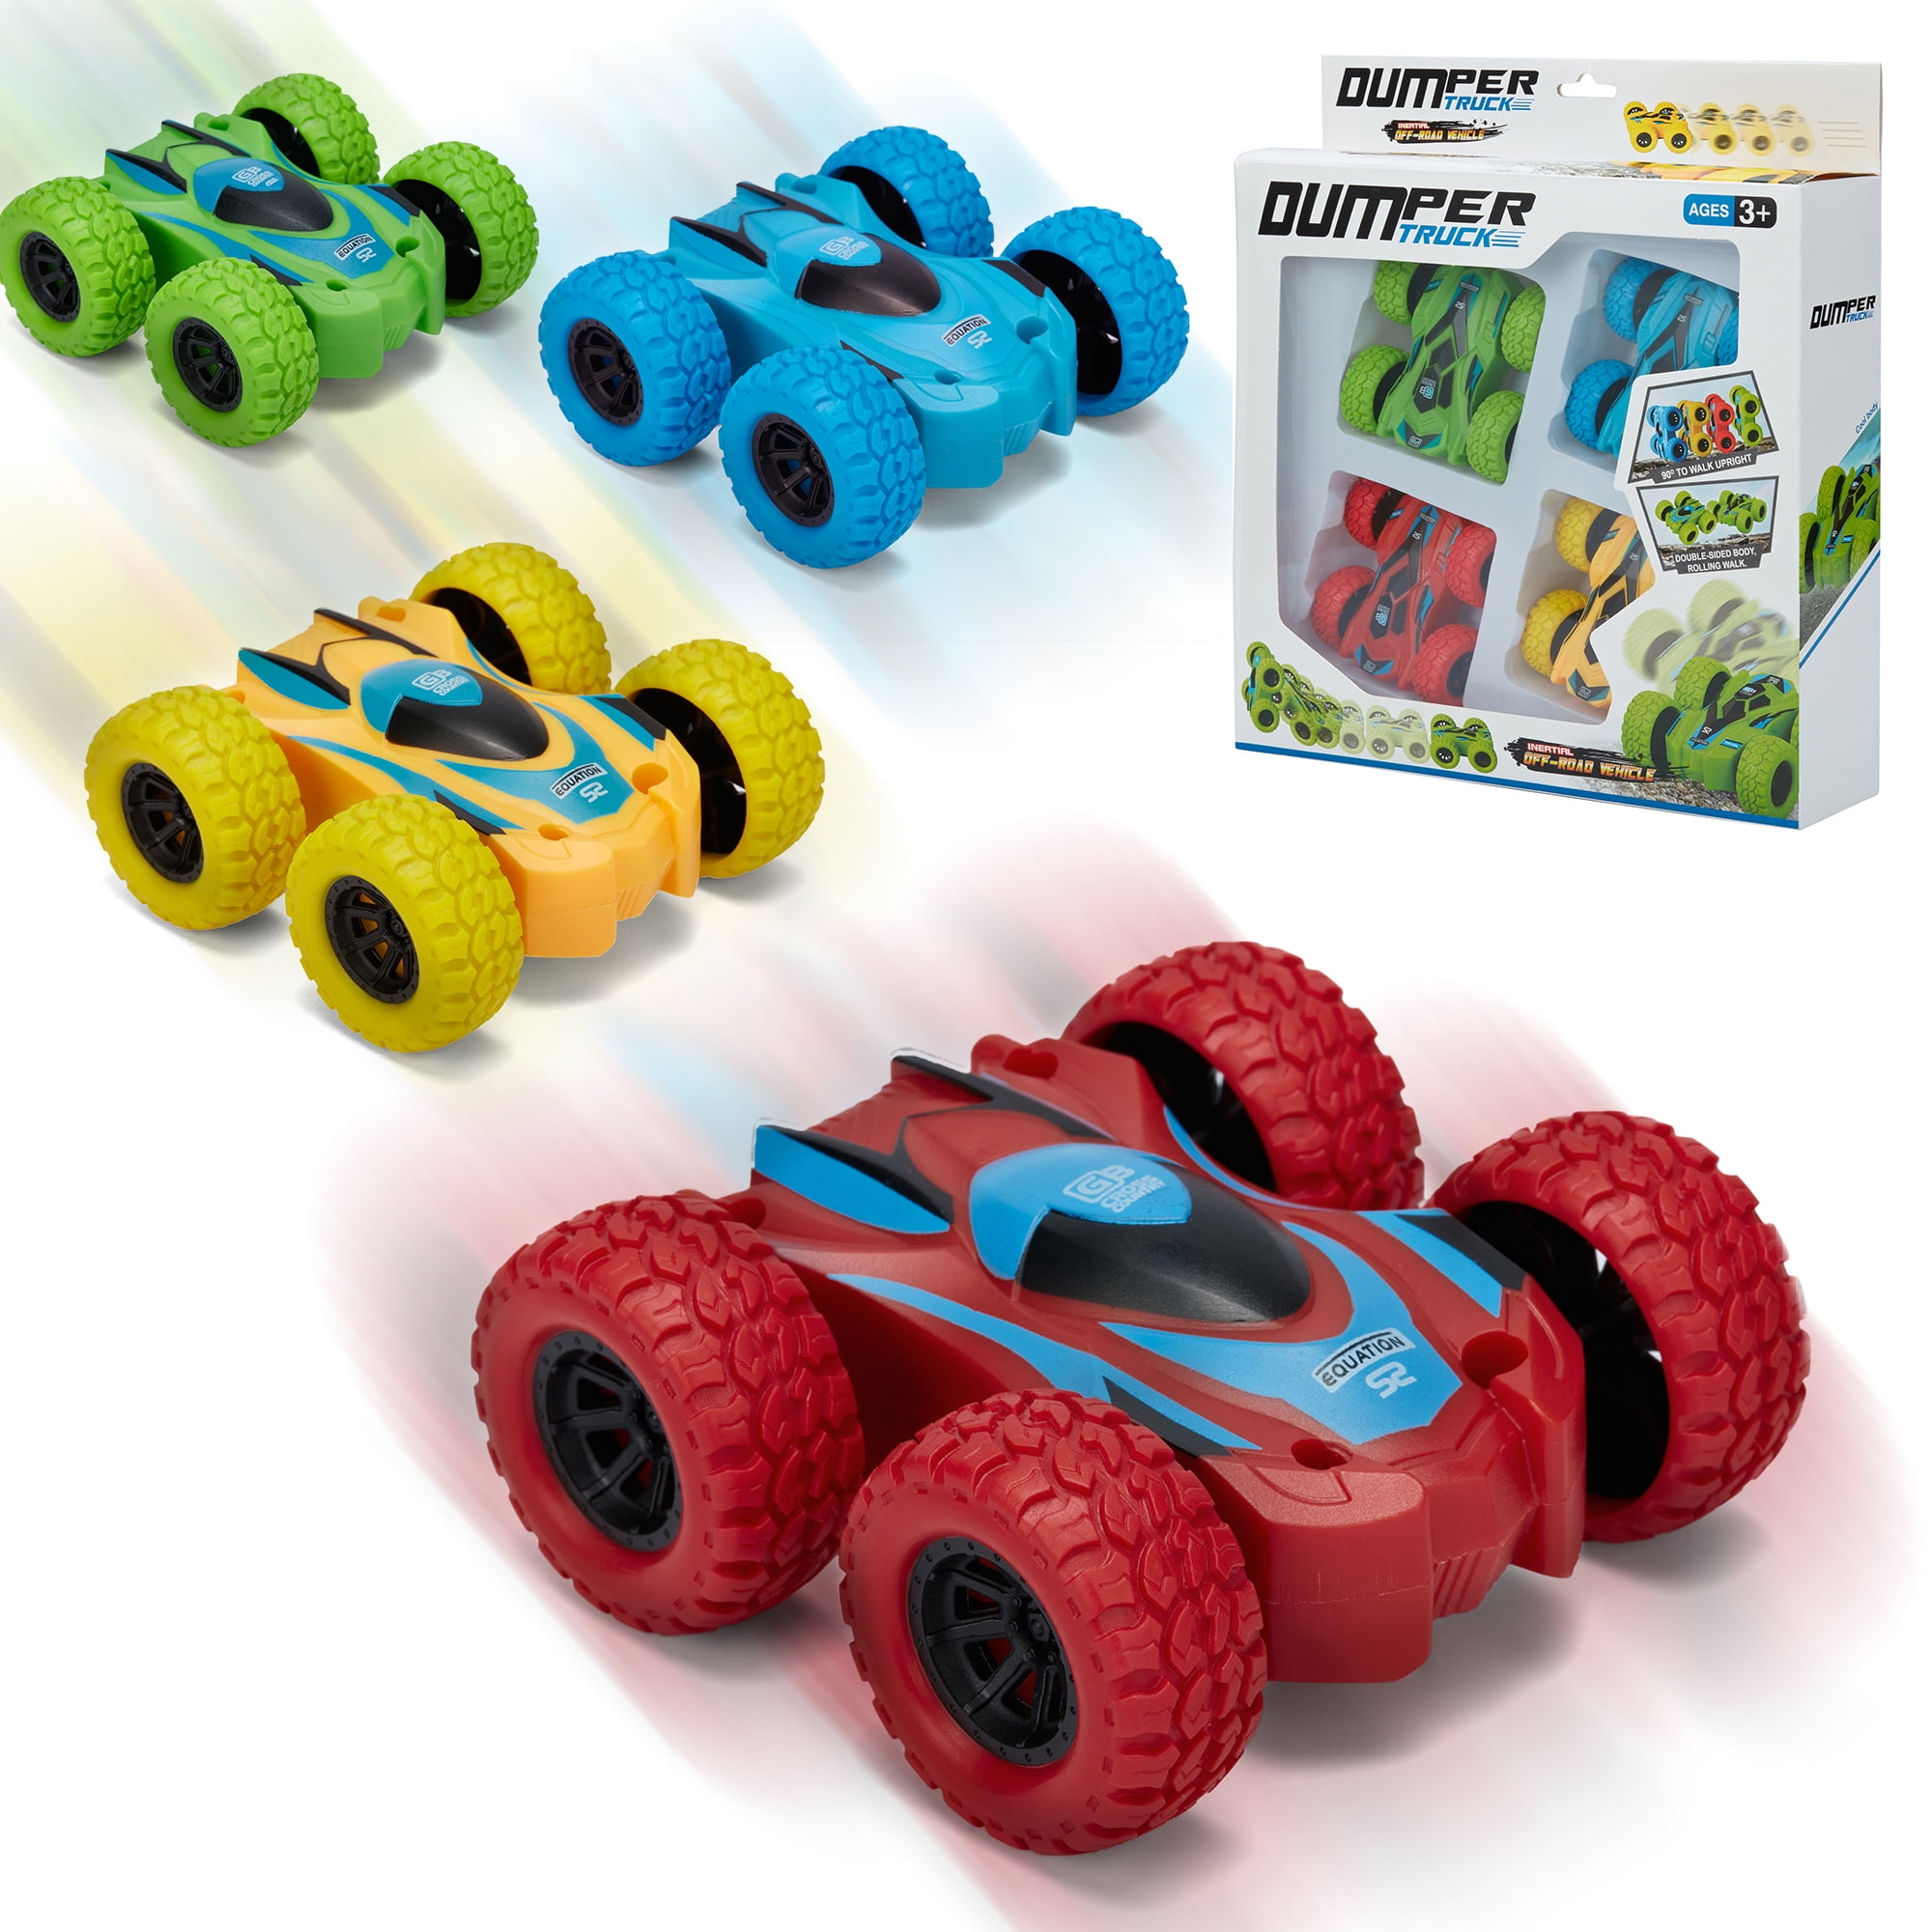 Christmas Birthday Gifts Age 3-4 Years Old Boys Girls Kids Toddler Toys Age 2-4 Pull Back Car Double-Sided Friction Powered Cars Toys for 3 Years Old Boys 